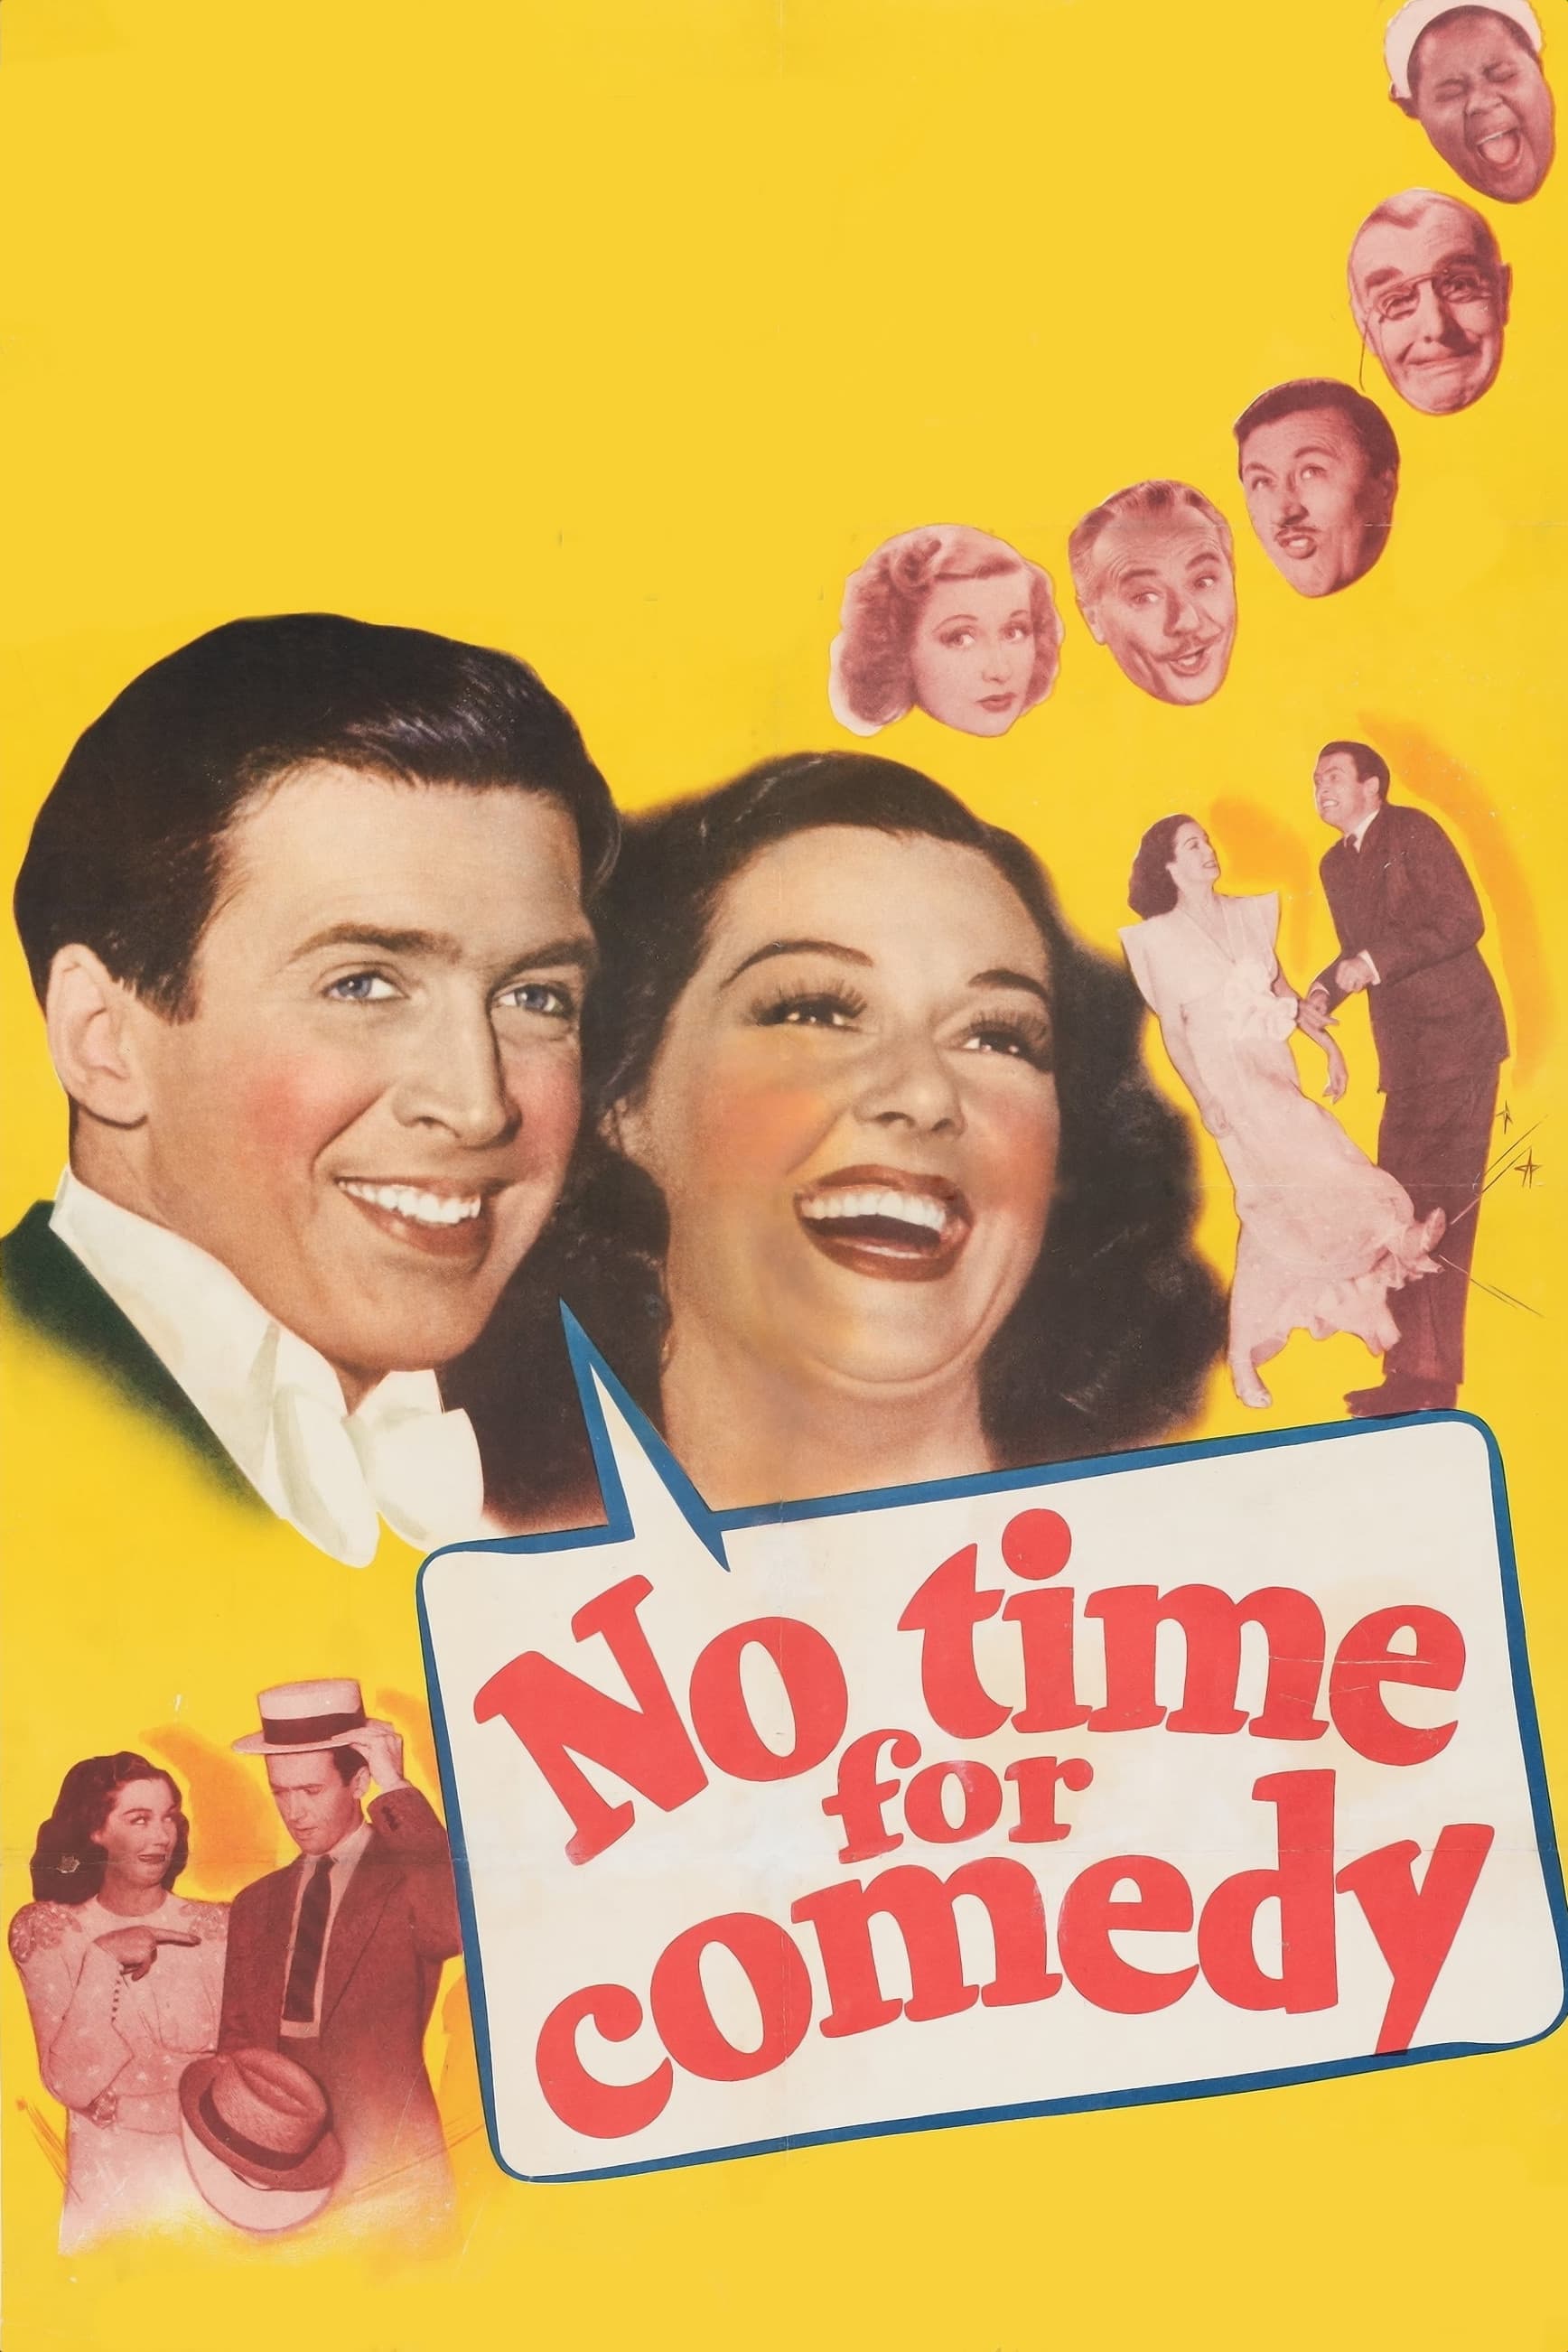 No Time for Comedy (1940)